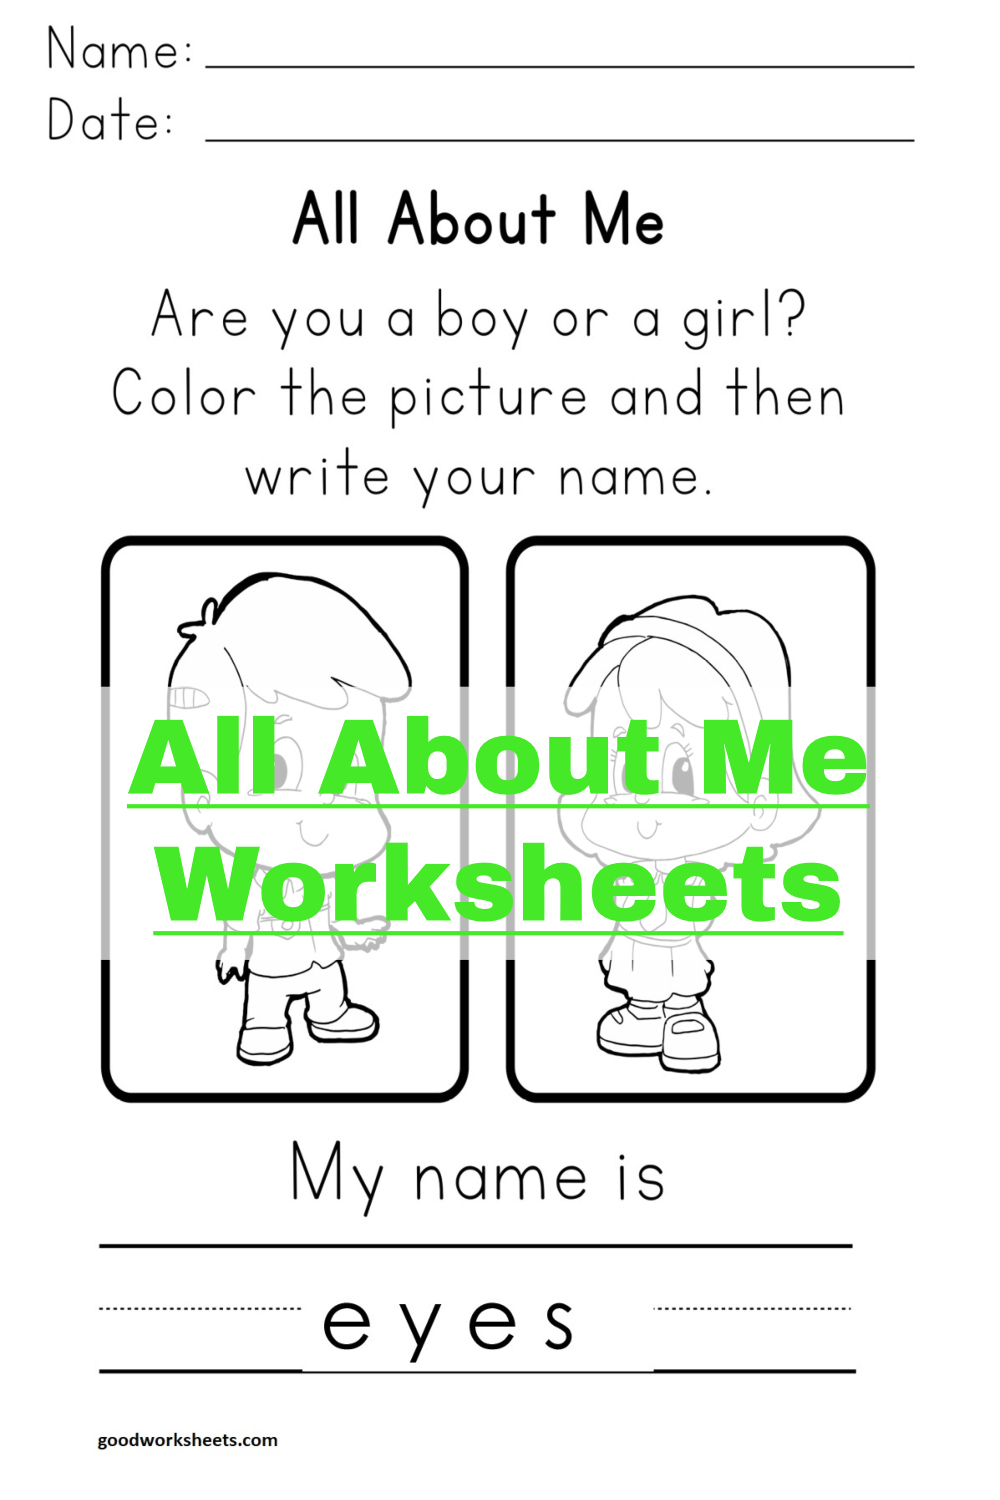 printable-printable-all-about-me-worksheets-goodworksheets